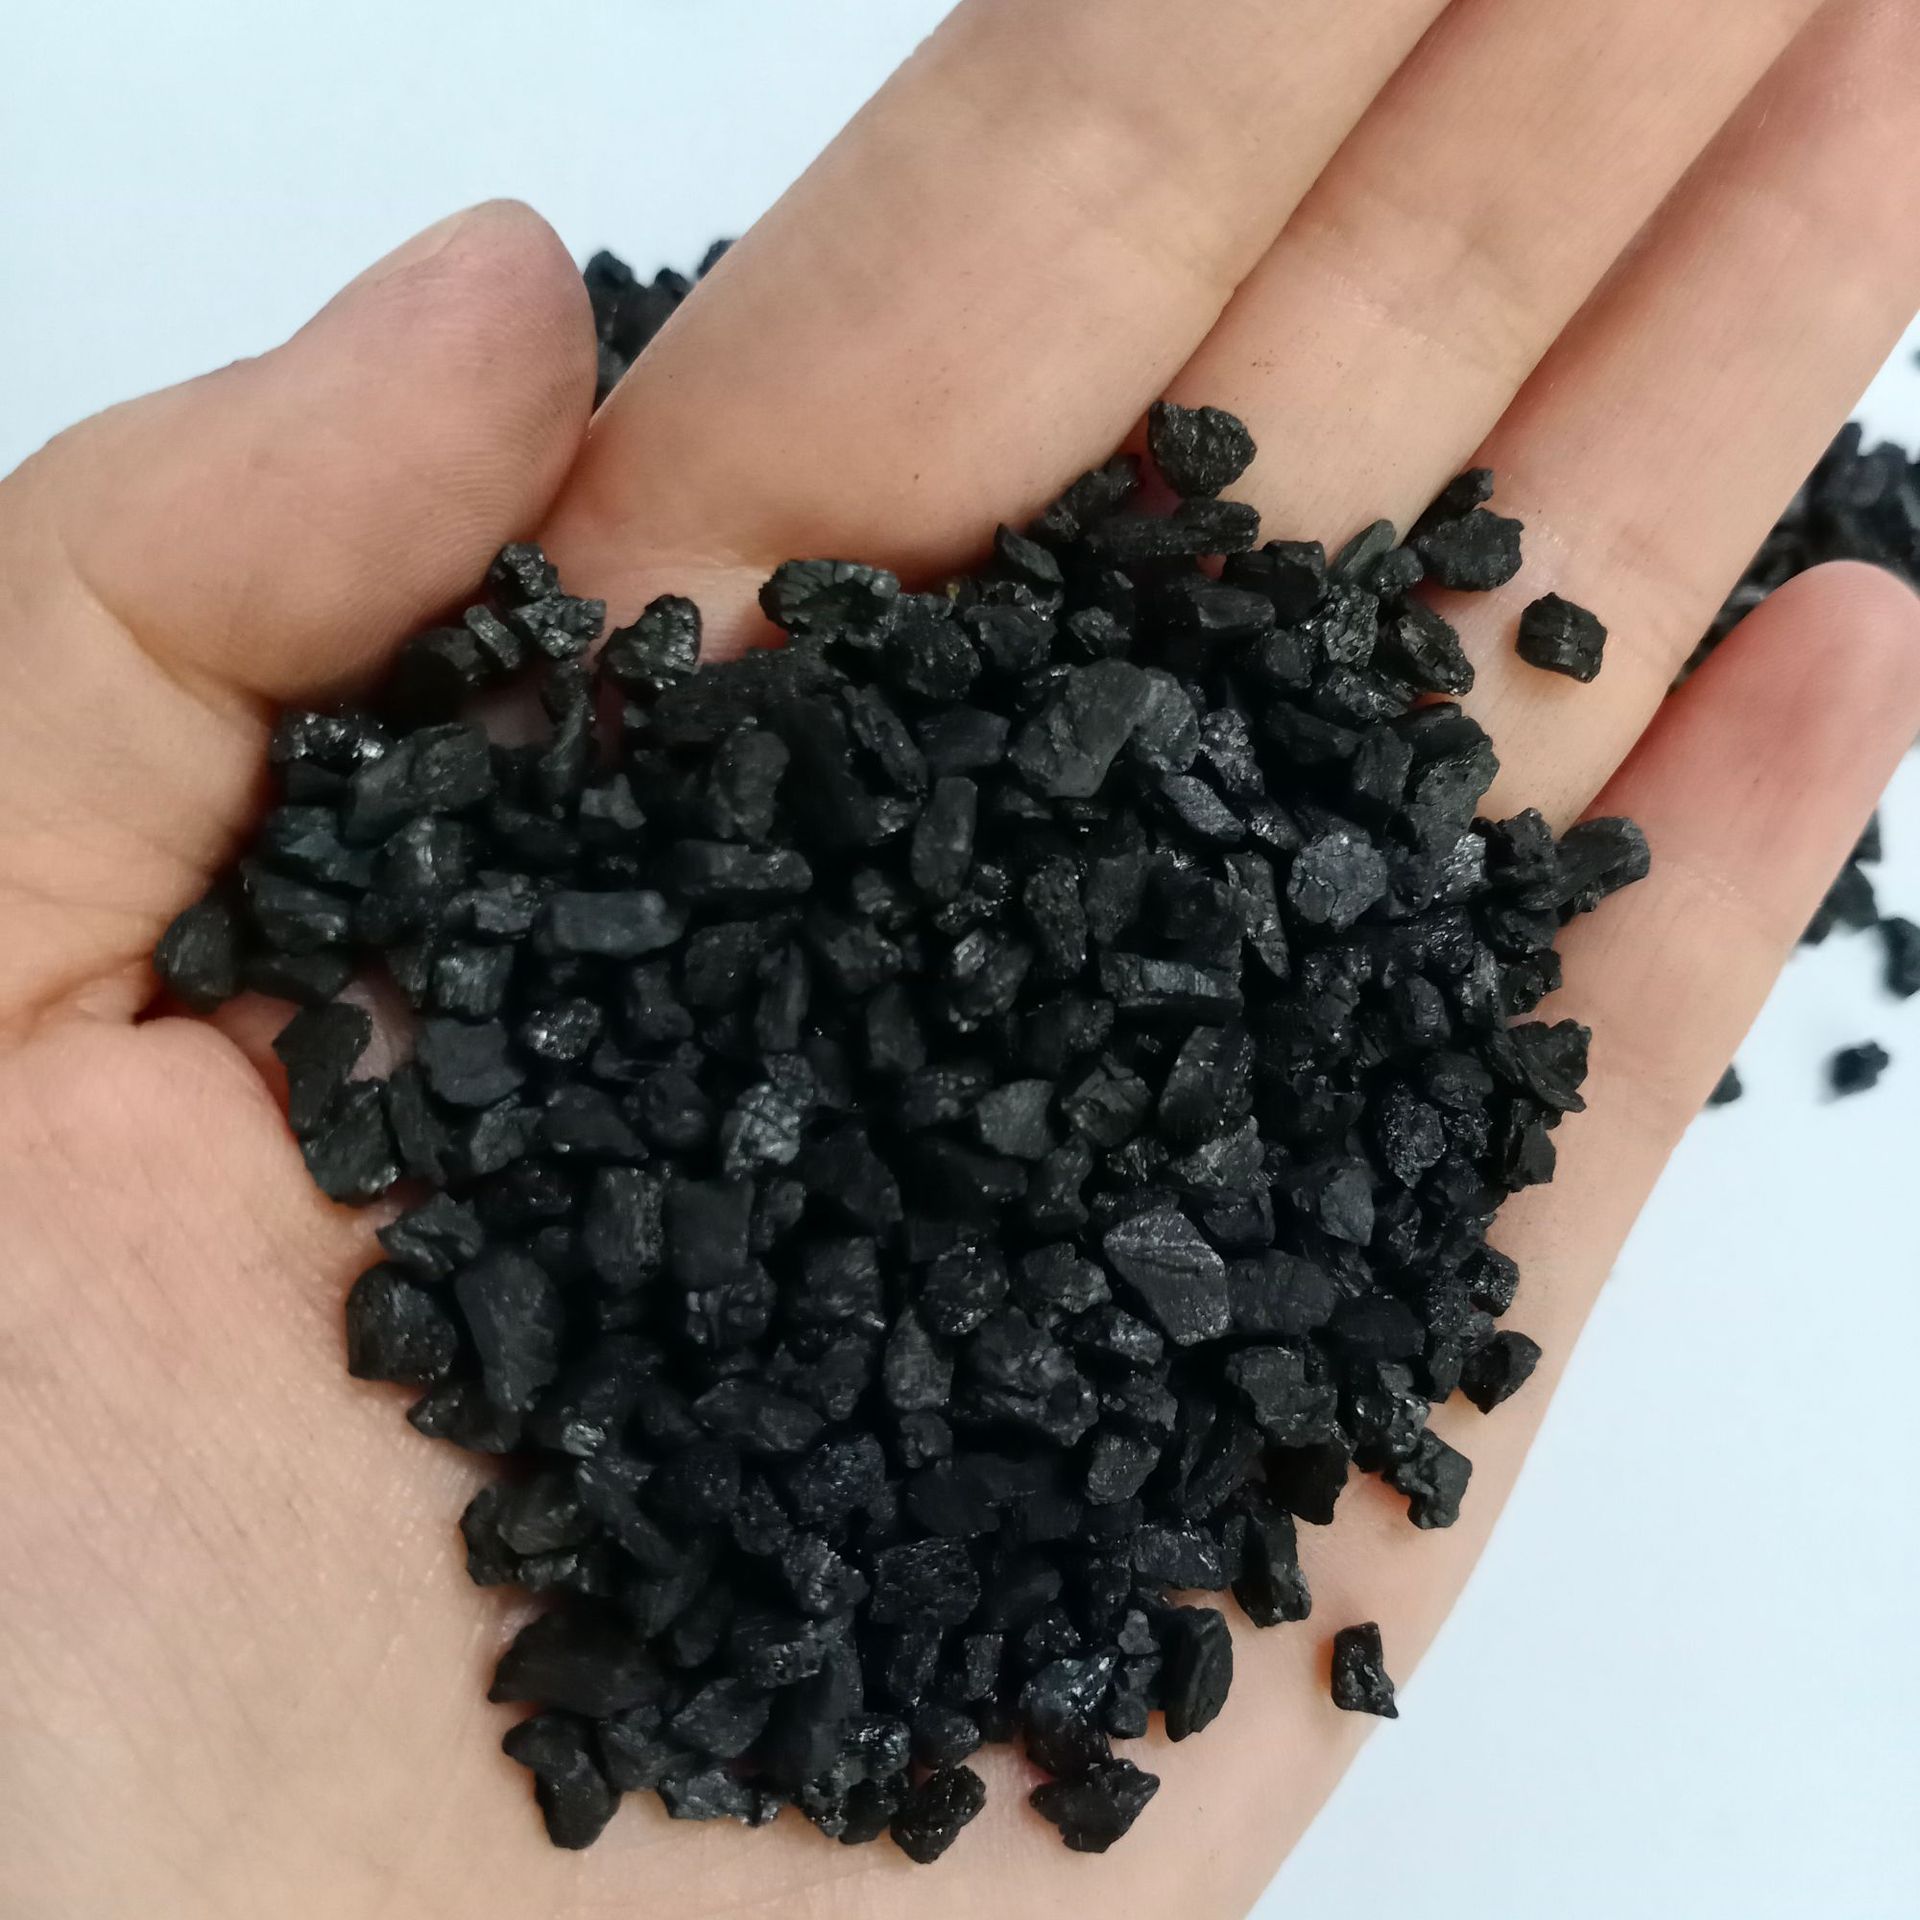 How To Make Activated Carbon?